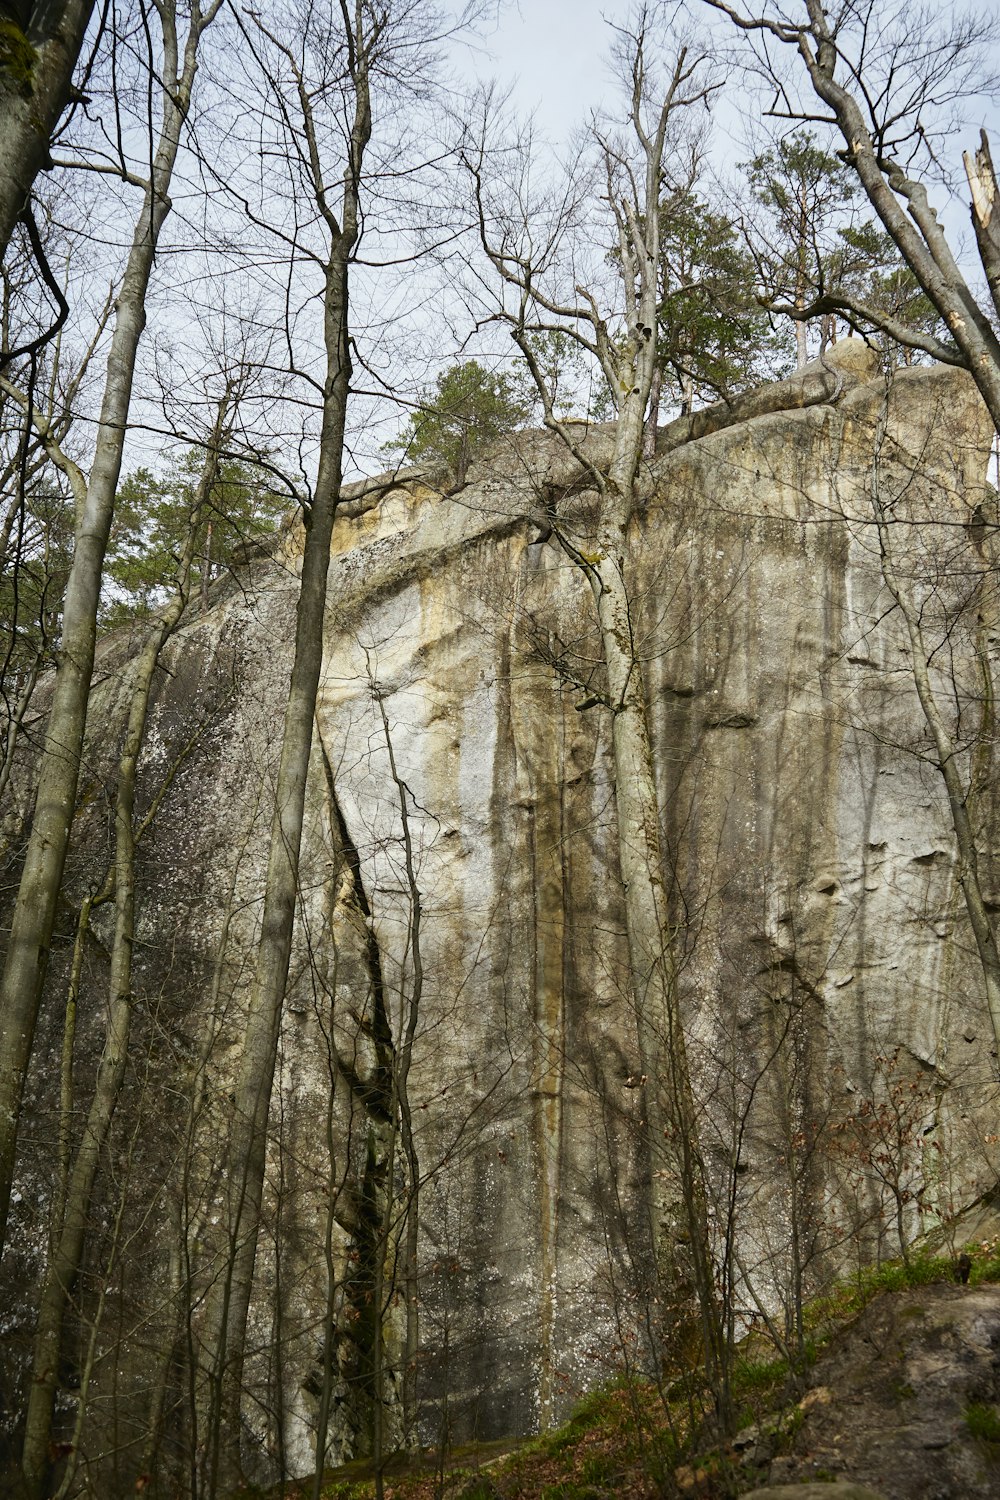 a large rock with trees growing on it